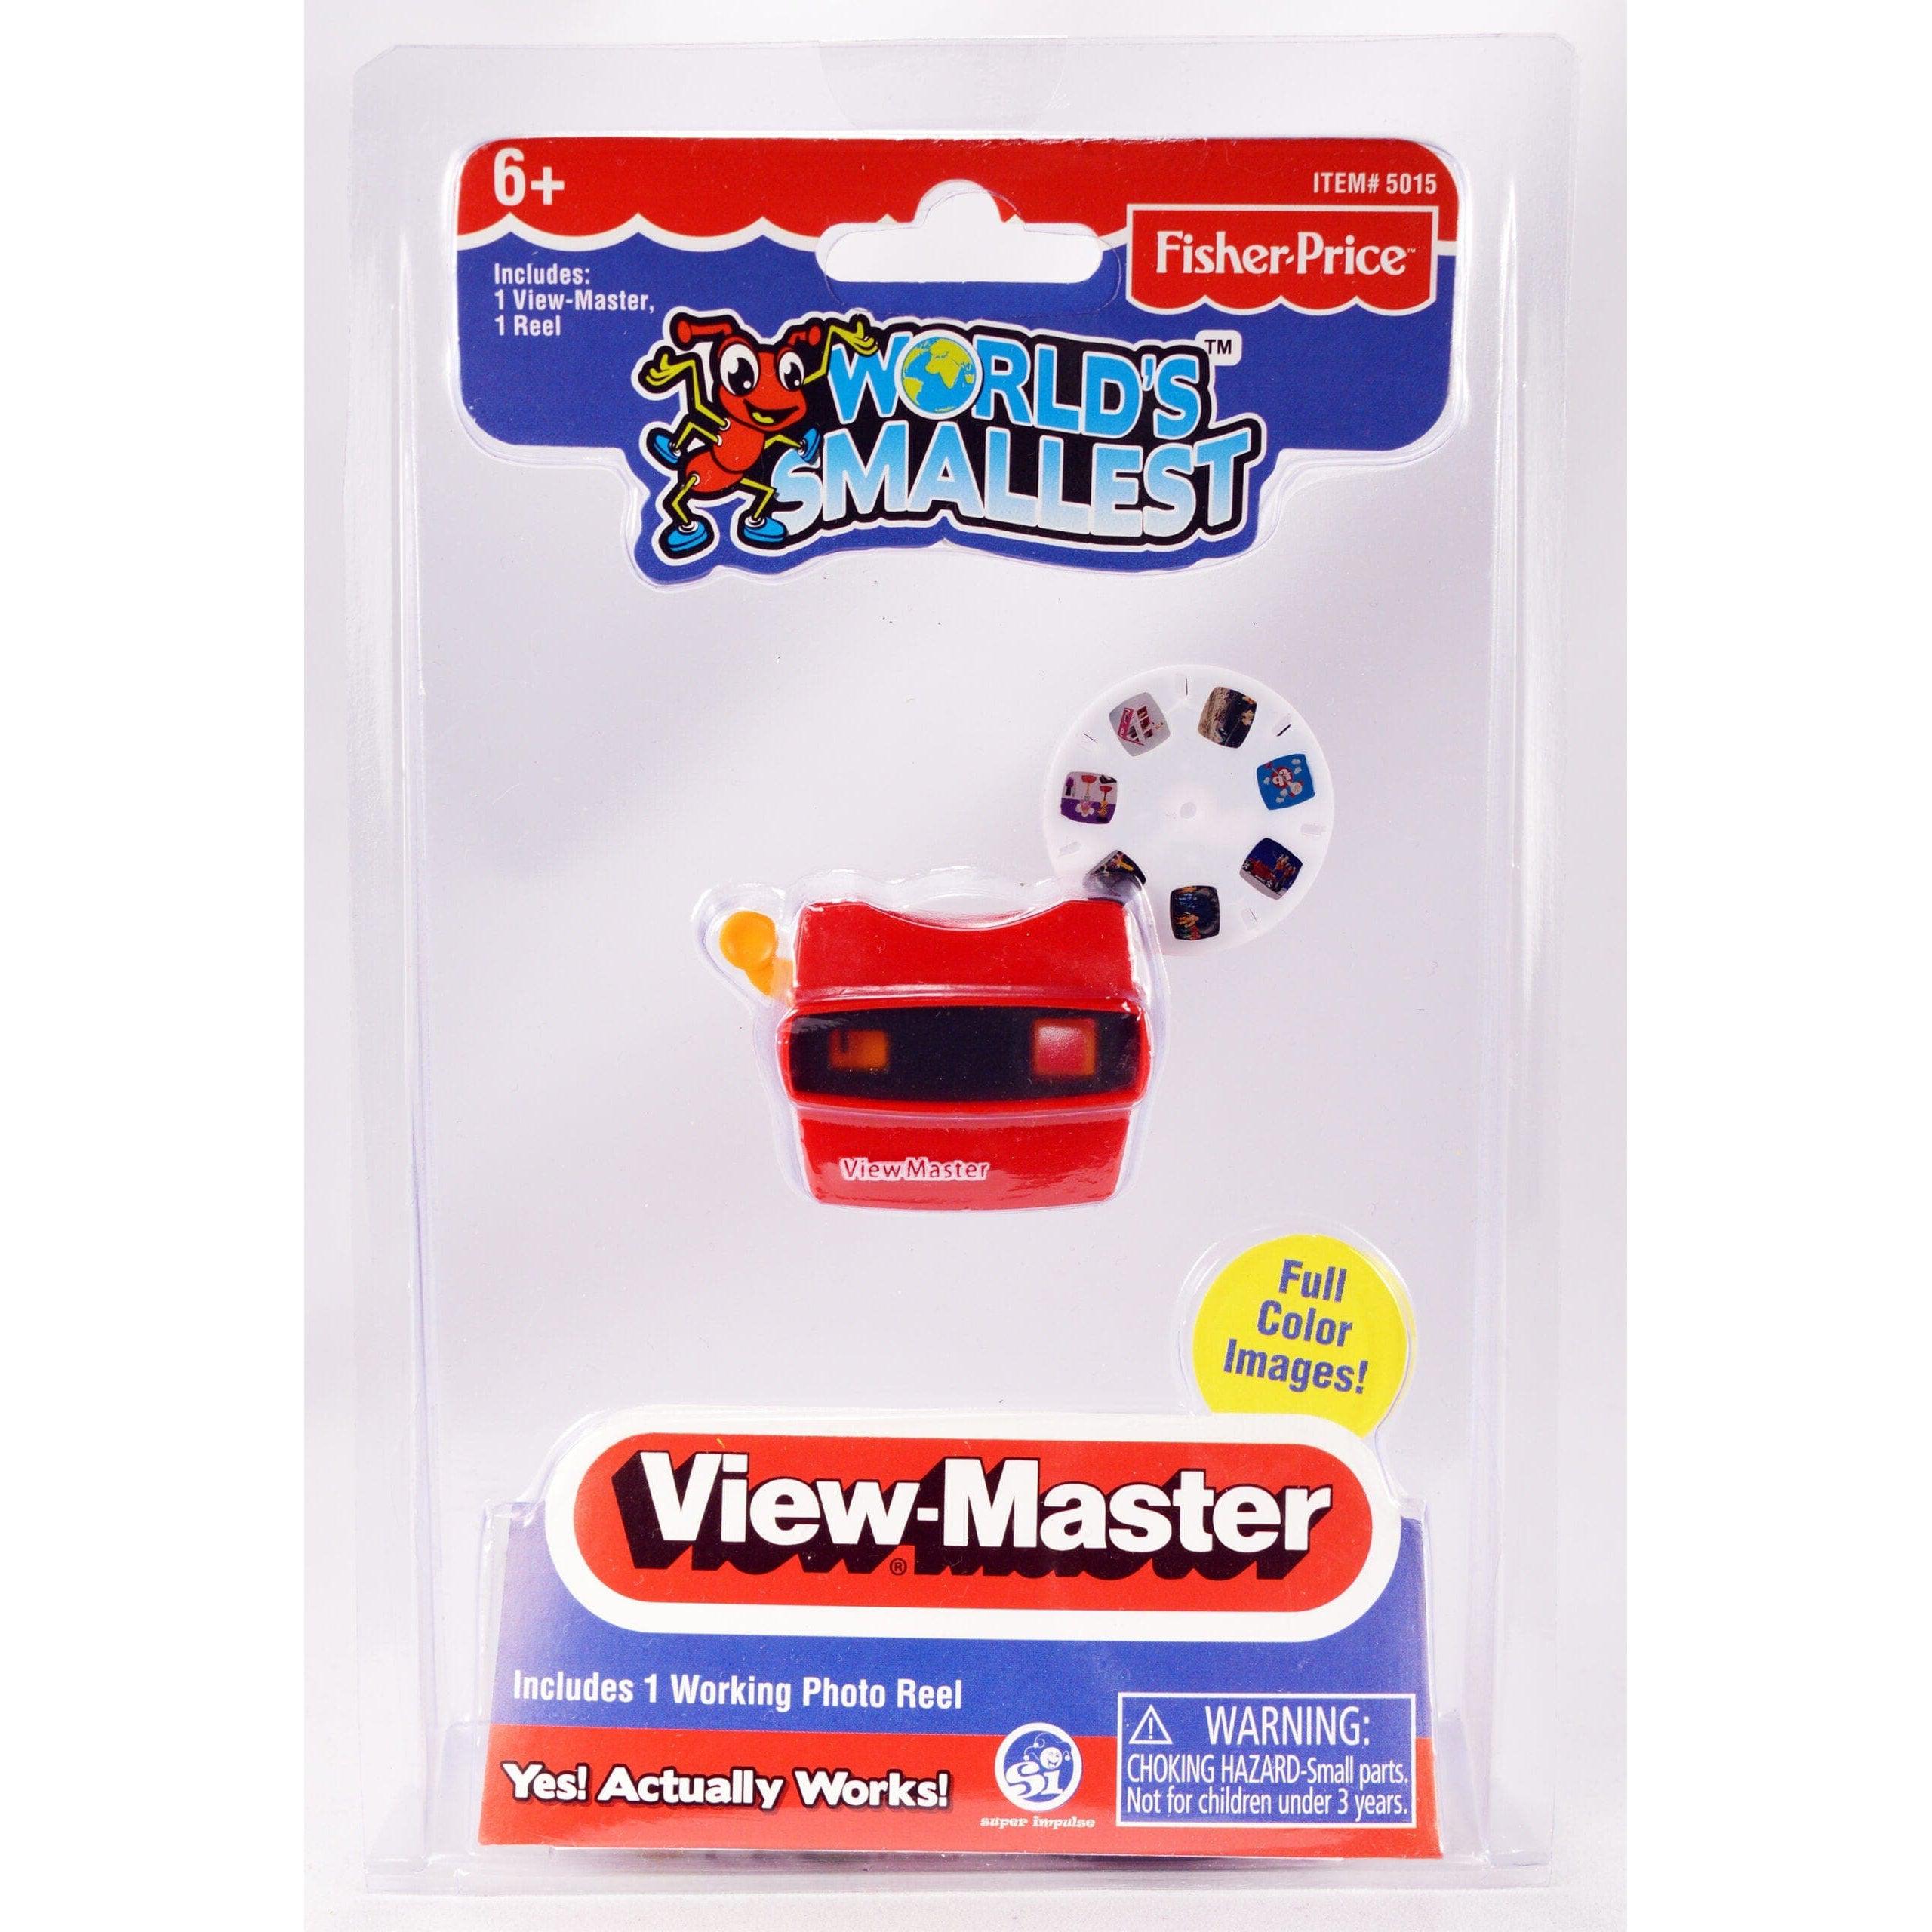 Spiderman Viewmaster discs  Childhood toys, View master, Retro toys